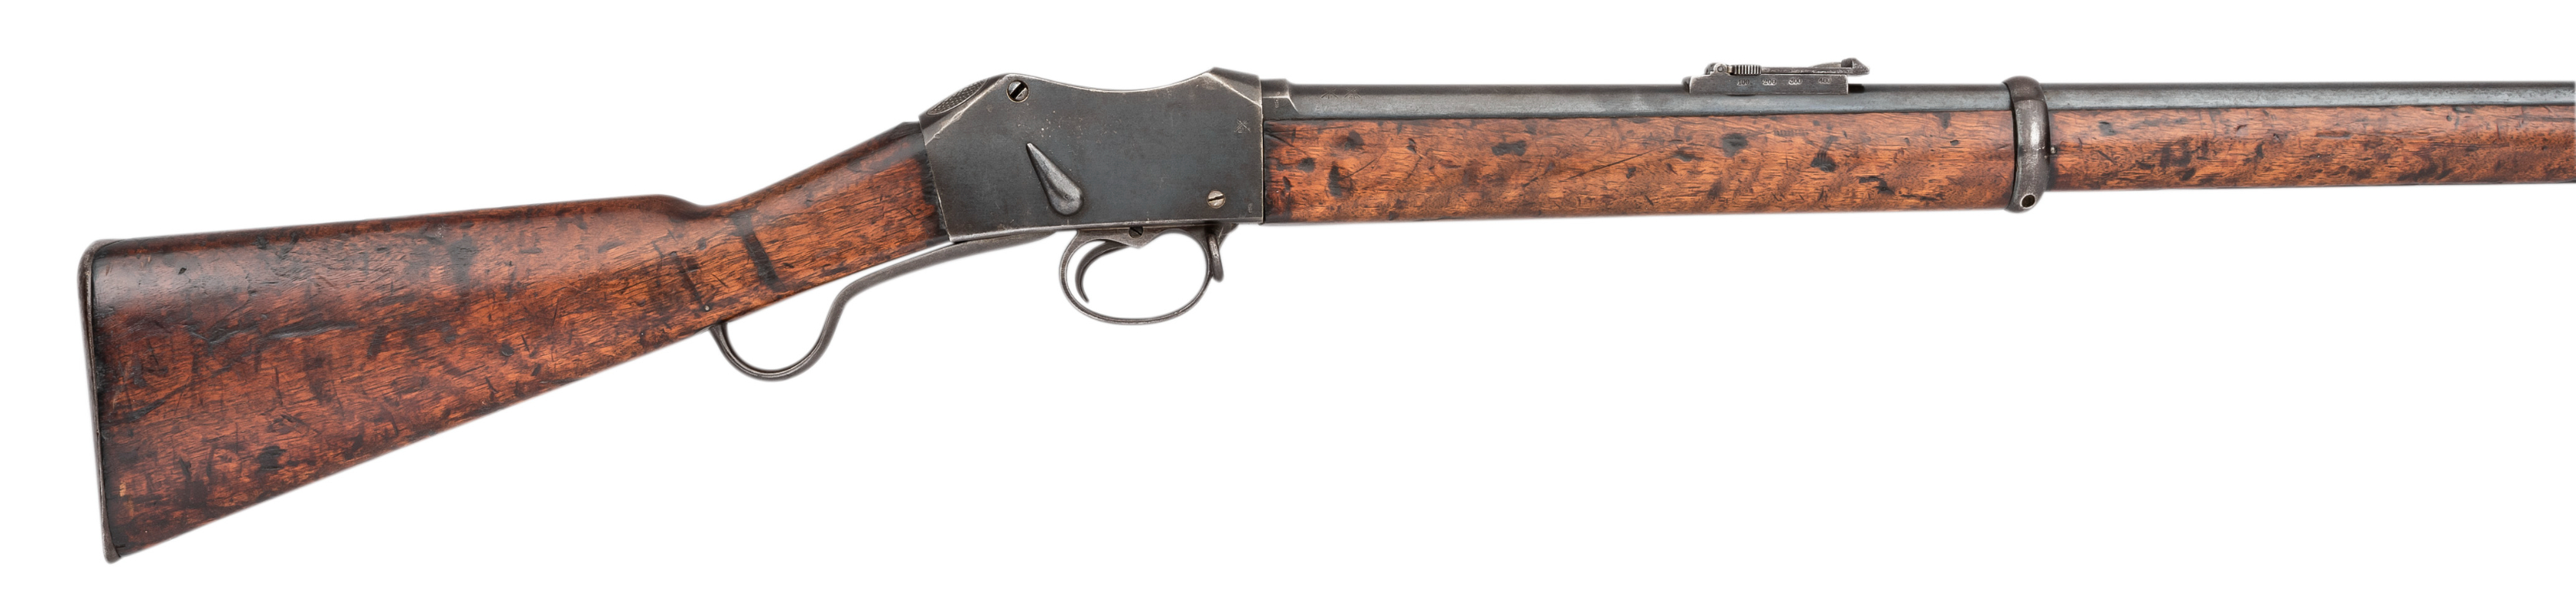 A .577/.450 MARTINI HENRY TWO BAND RIFLE, LAST QUARTER OF THE 19TH CENTURY